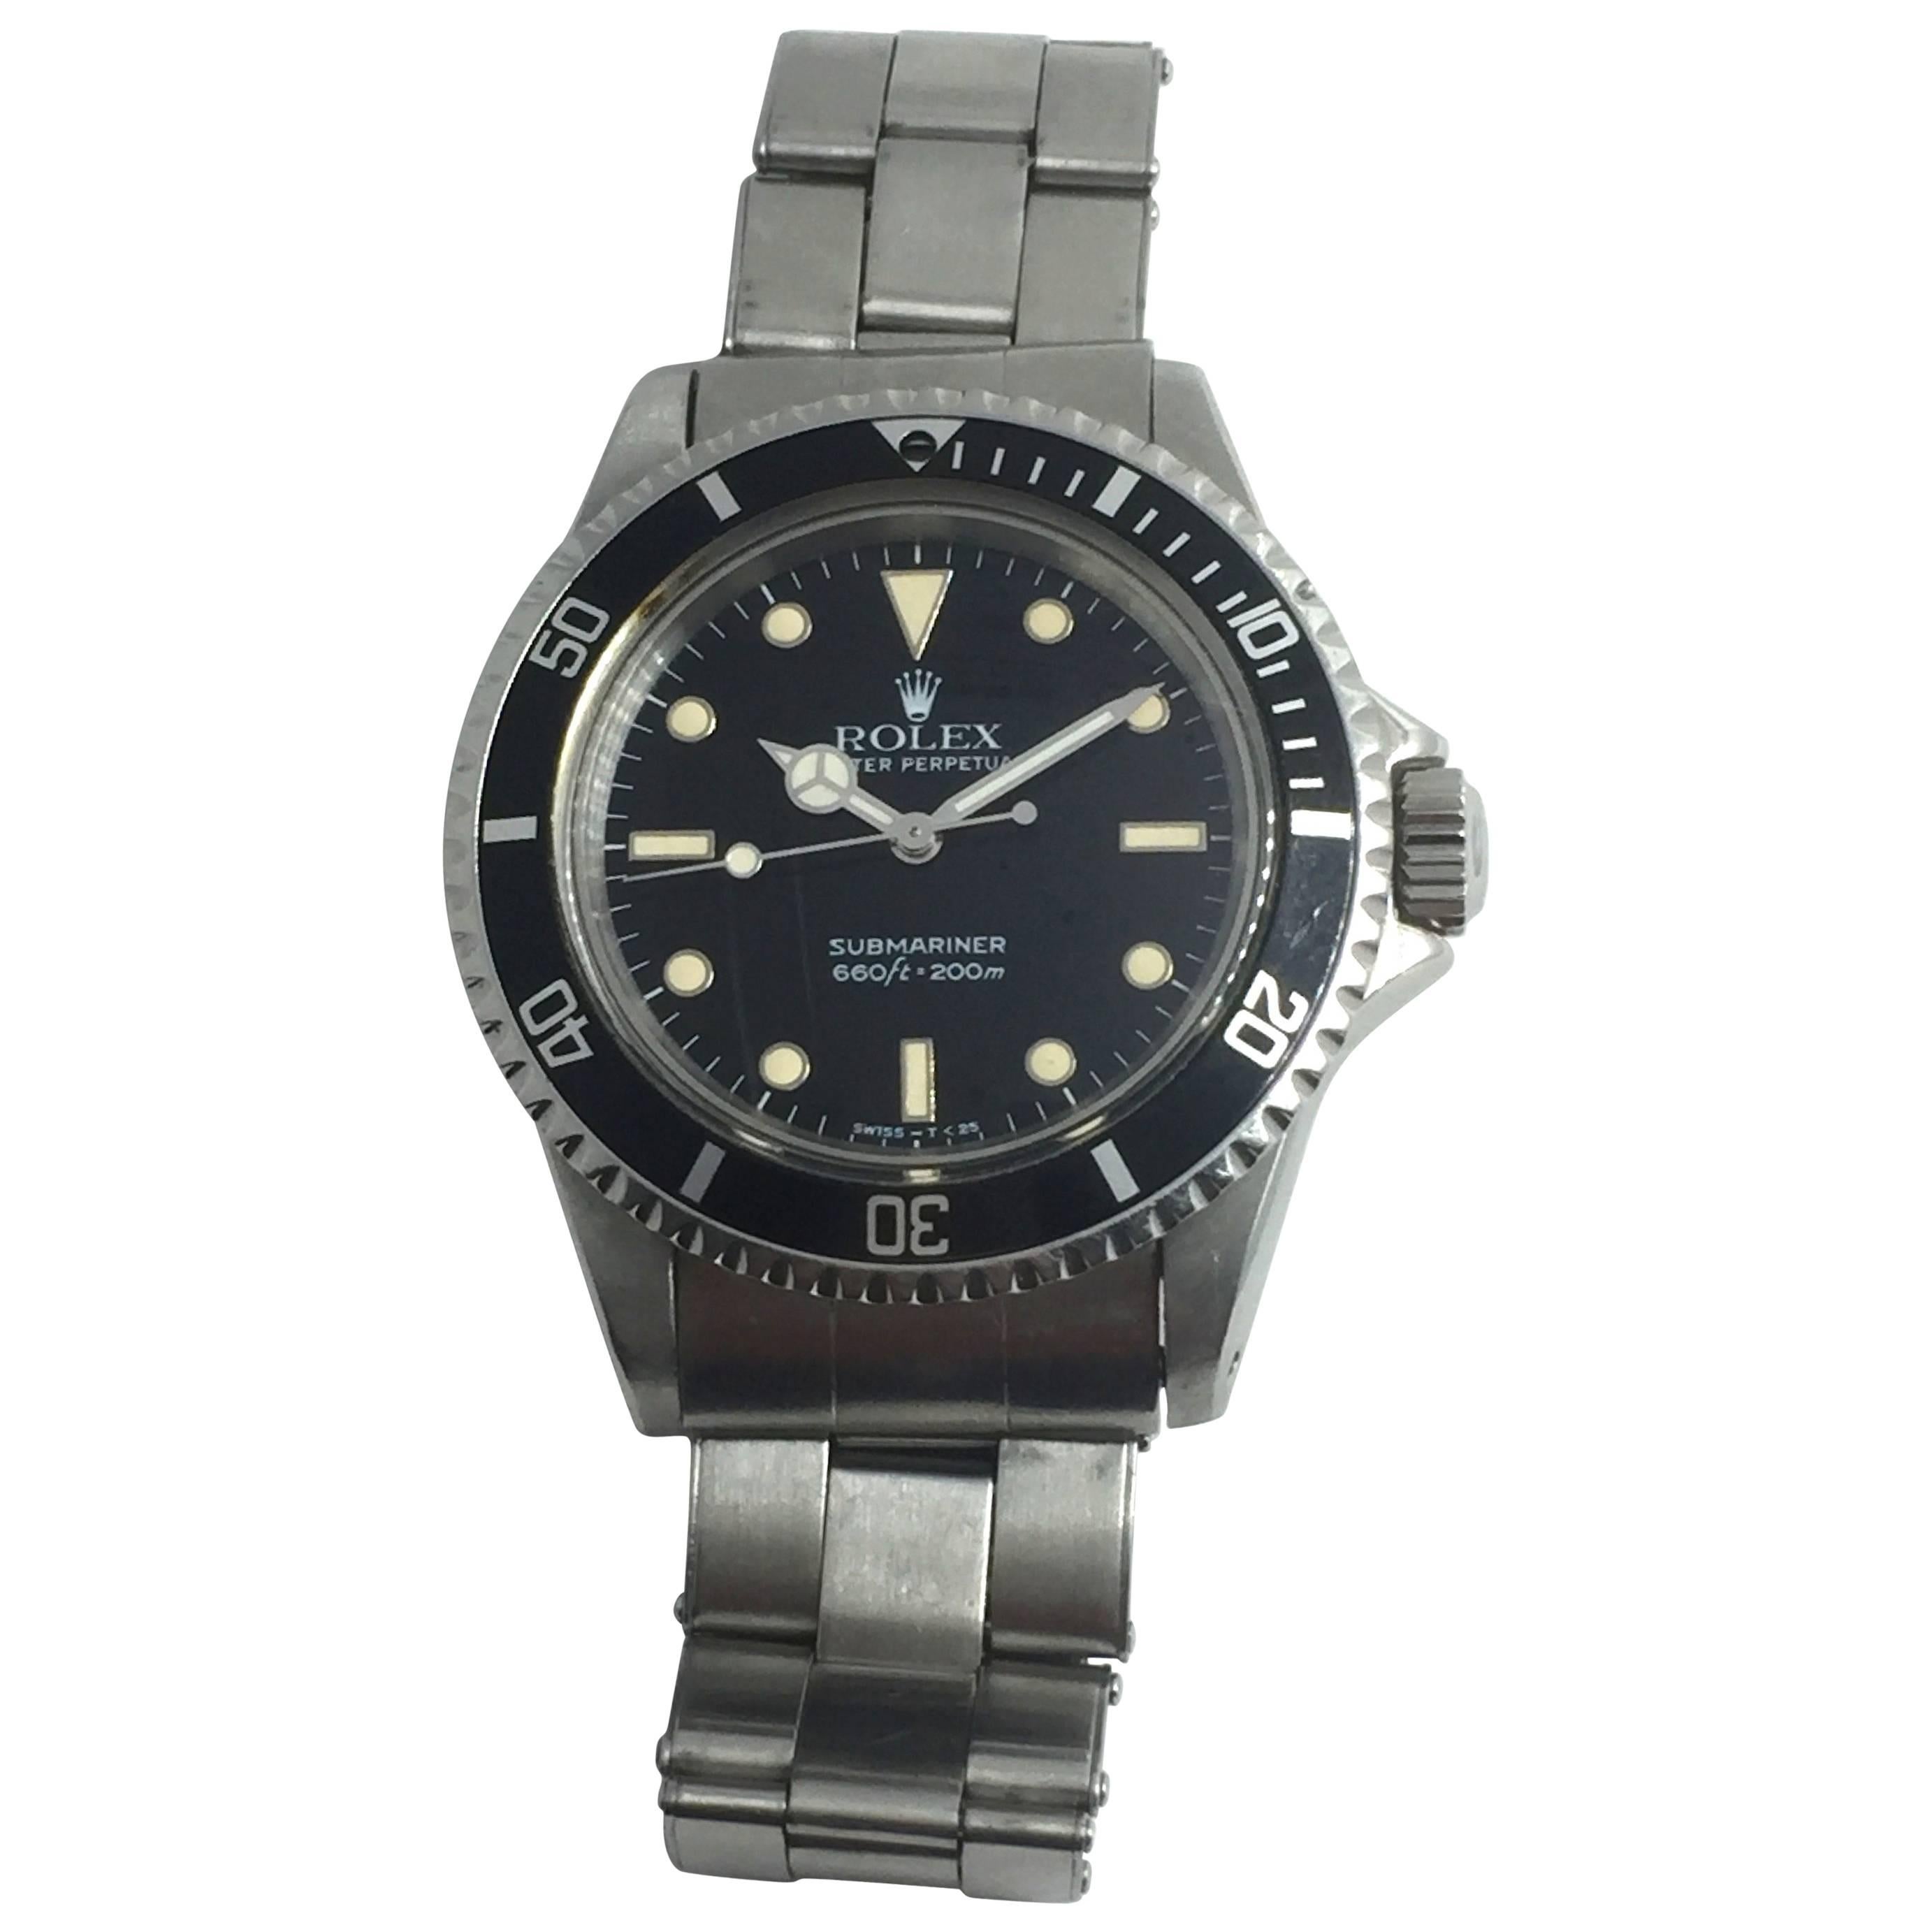 Rolex Stainless Steel Oyster Perpetual Submariner Automatic Wristwatch Ref 5513 